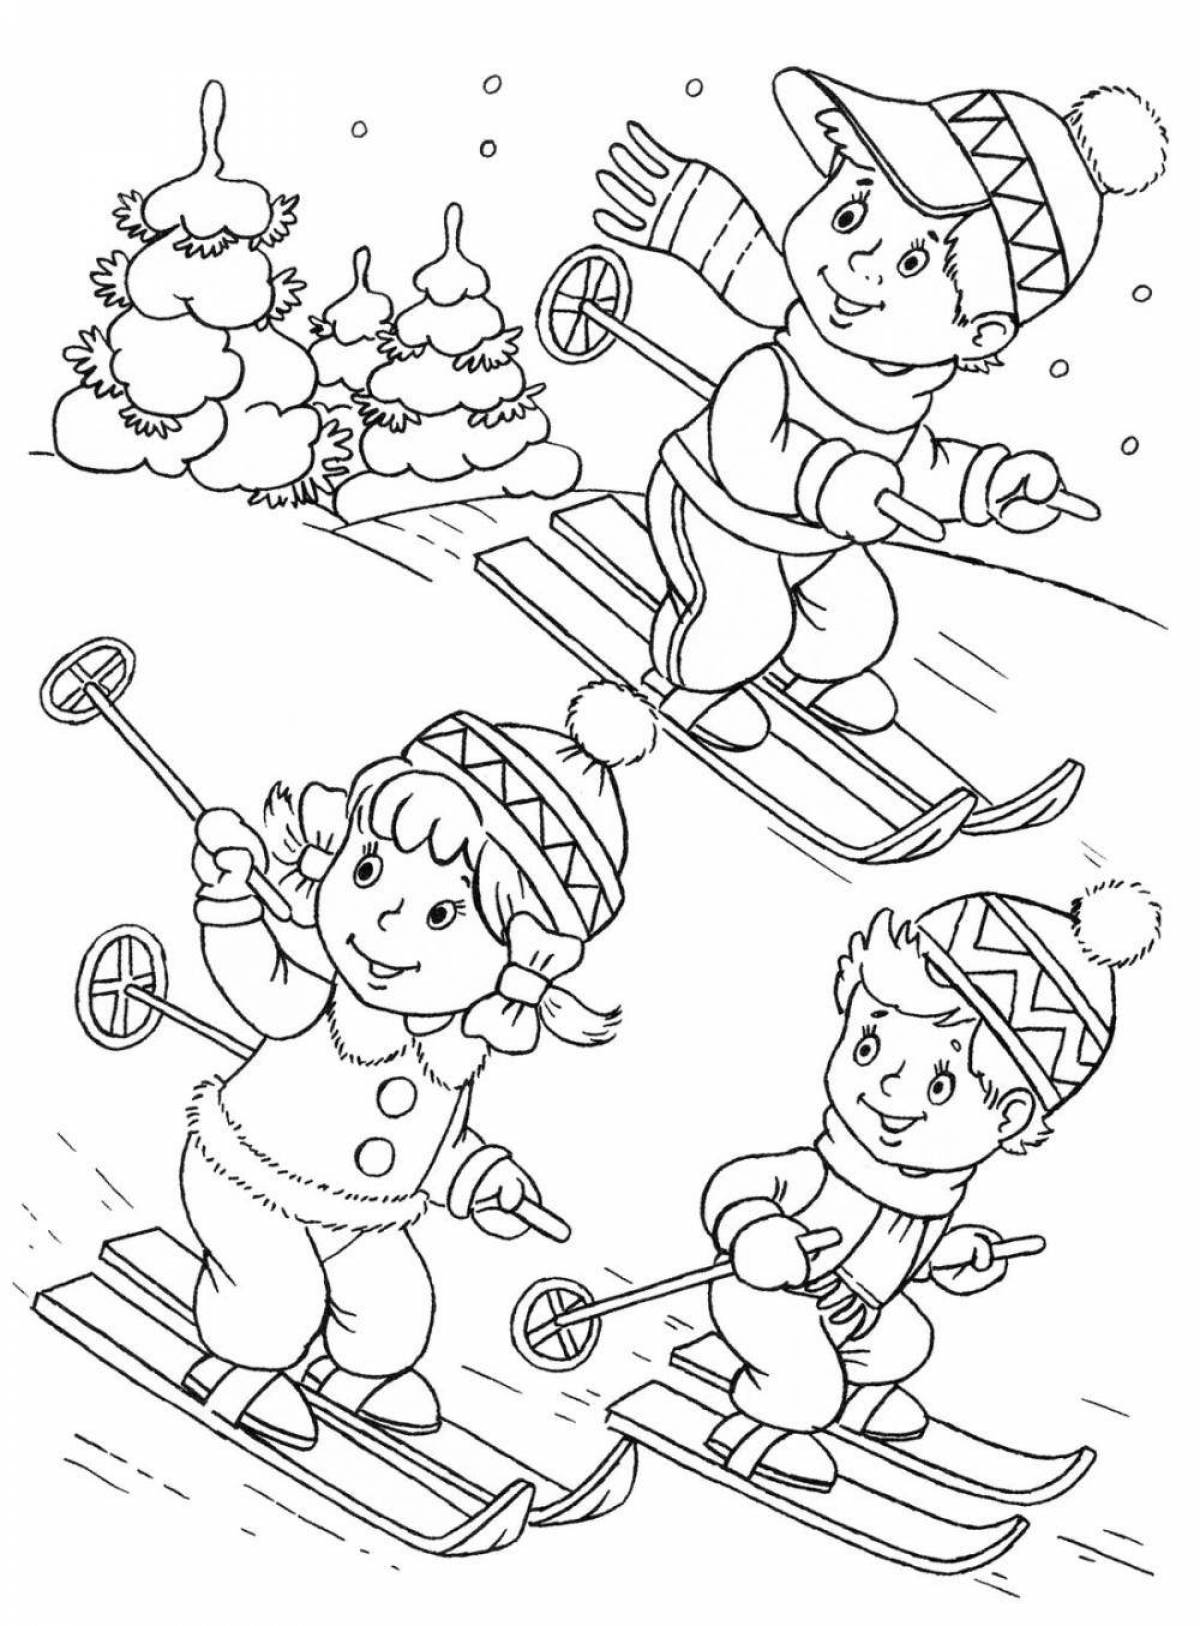 Playful winter games coloring book